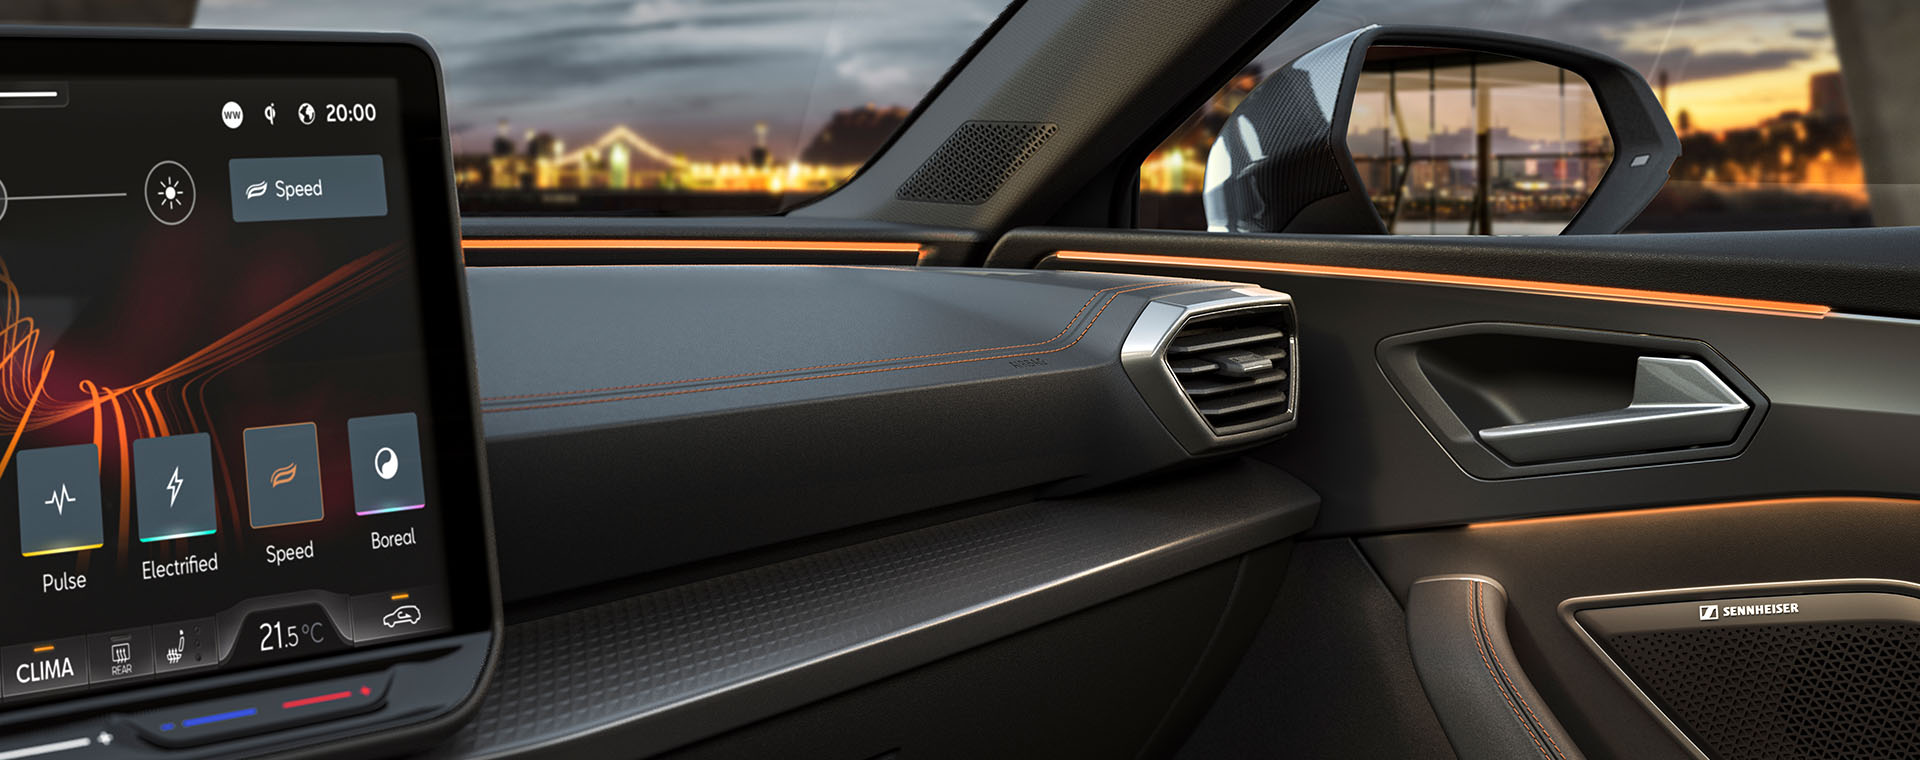 new infotainment system inside the 2024 cupra leon, dashboard interior, wing mirror, air vent and glove compartment.